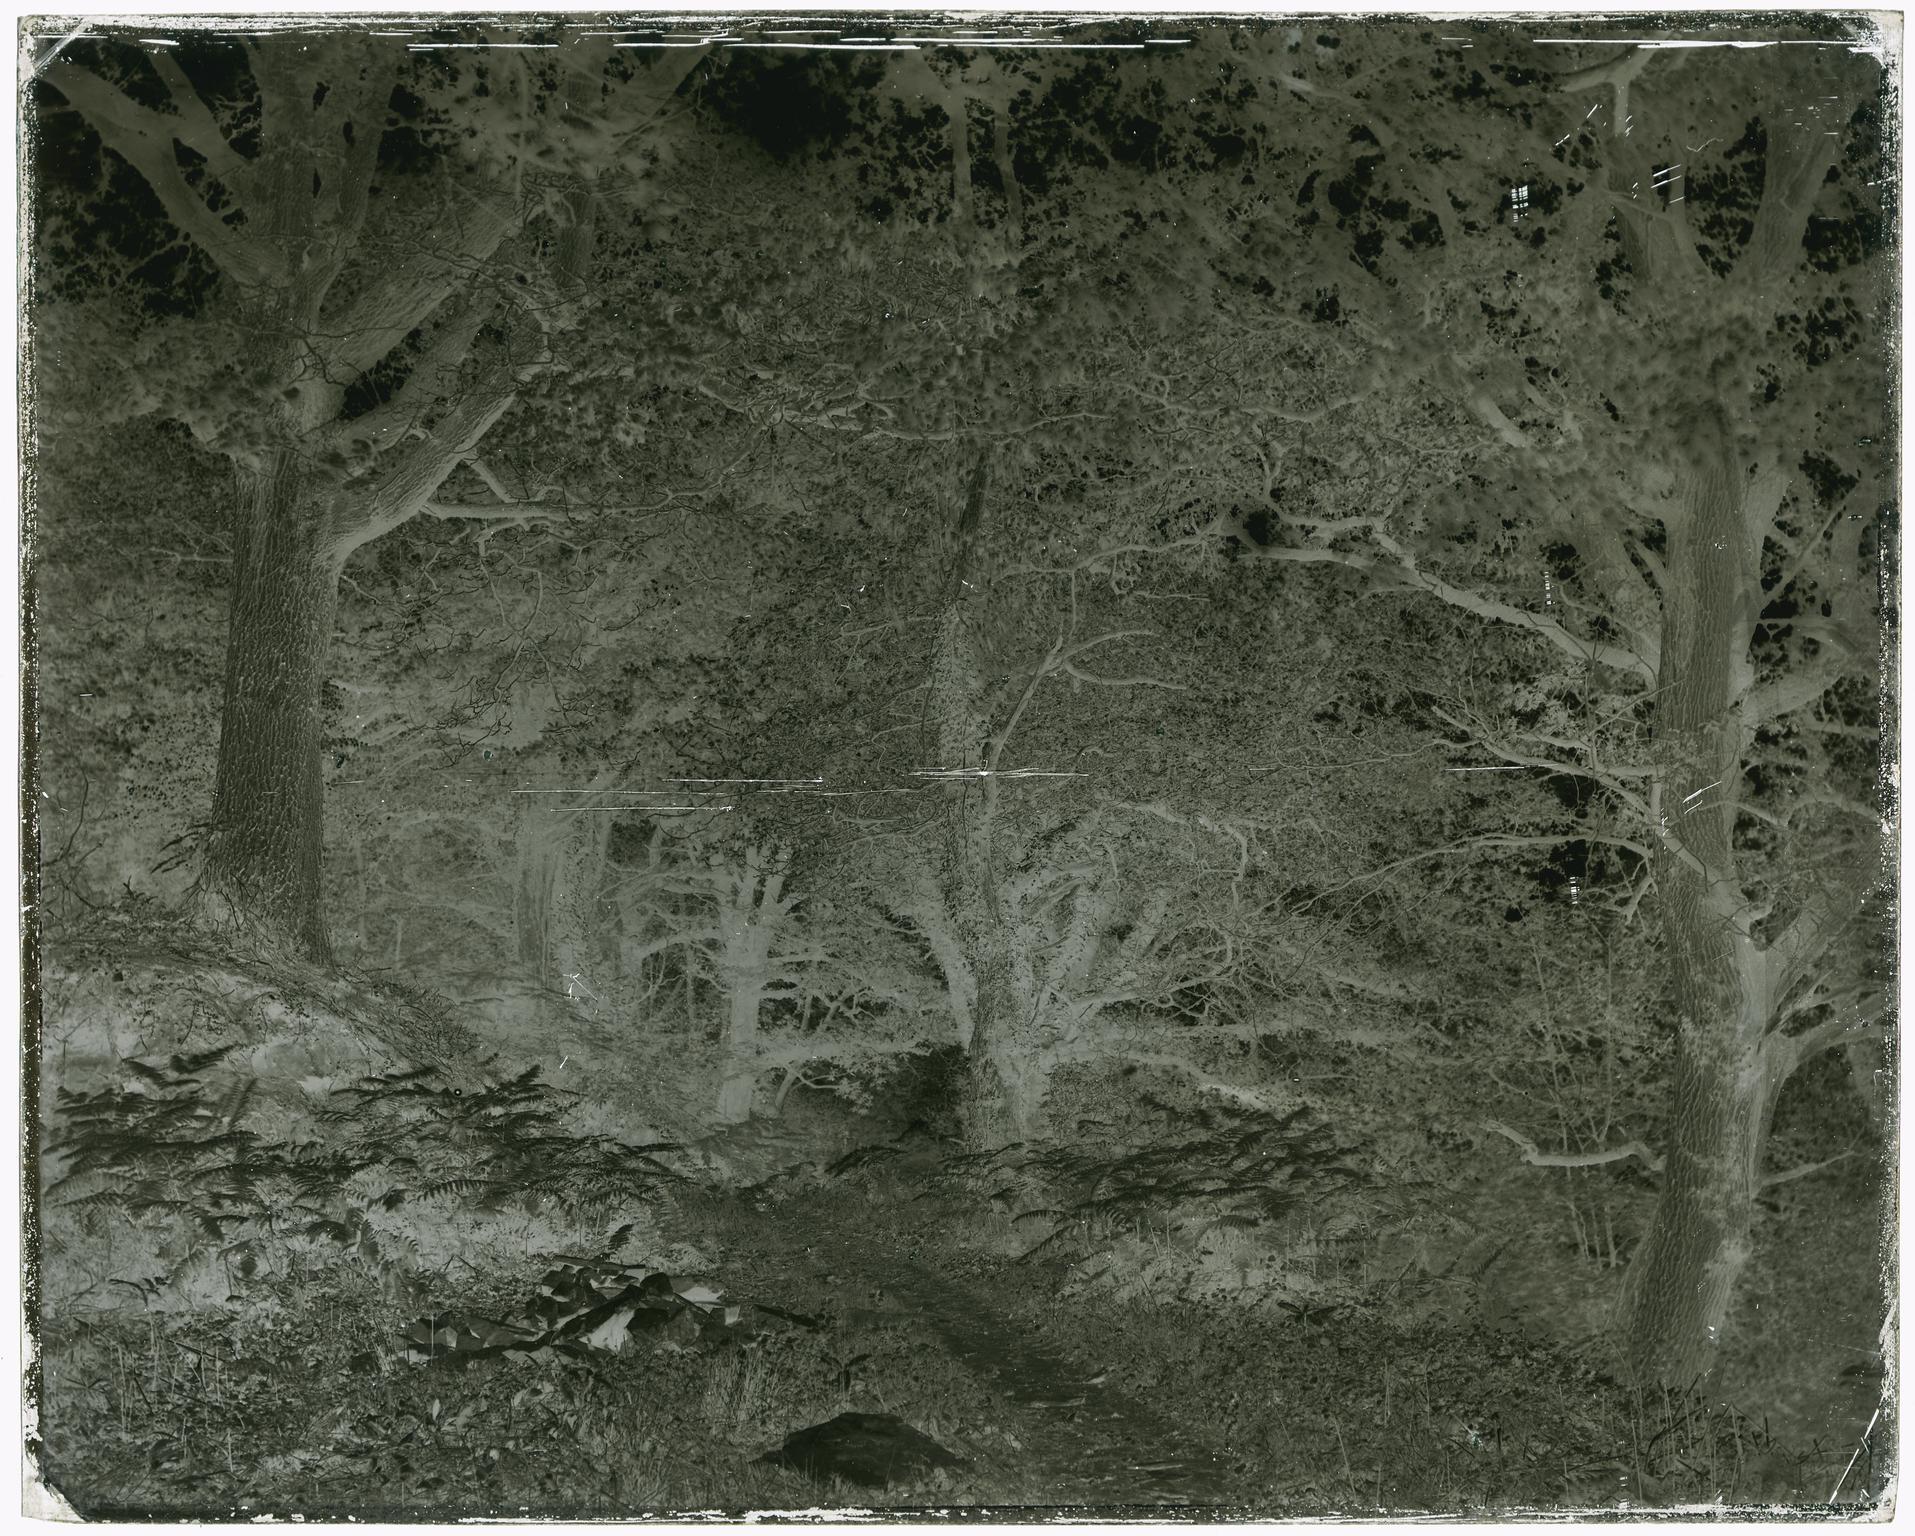 Ferns and forest scenery, glass negative